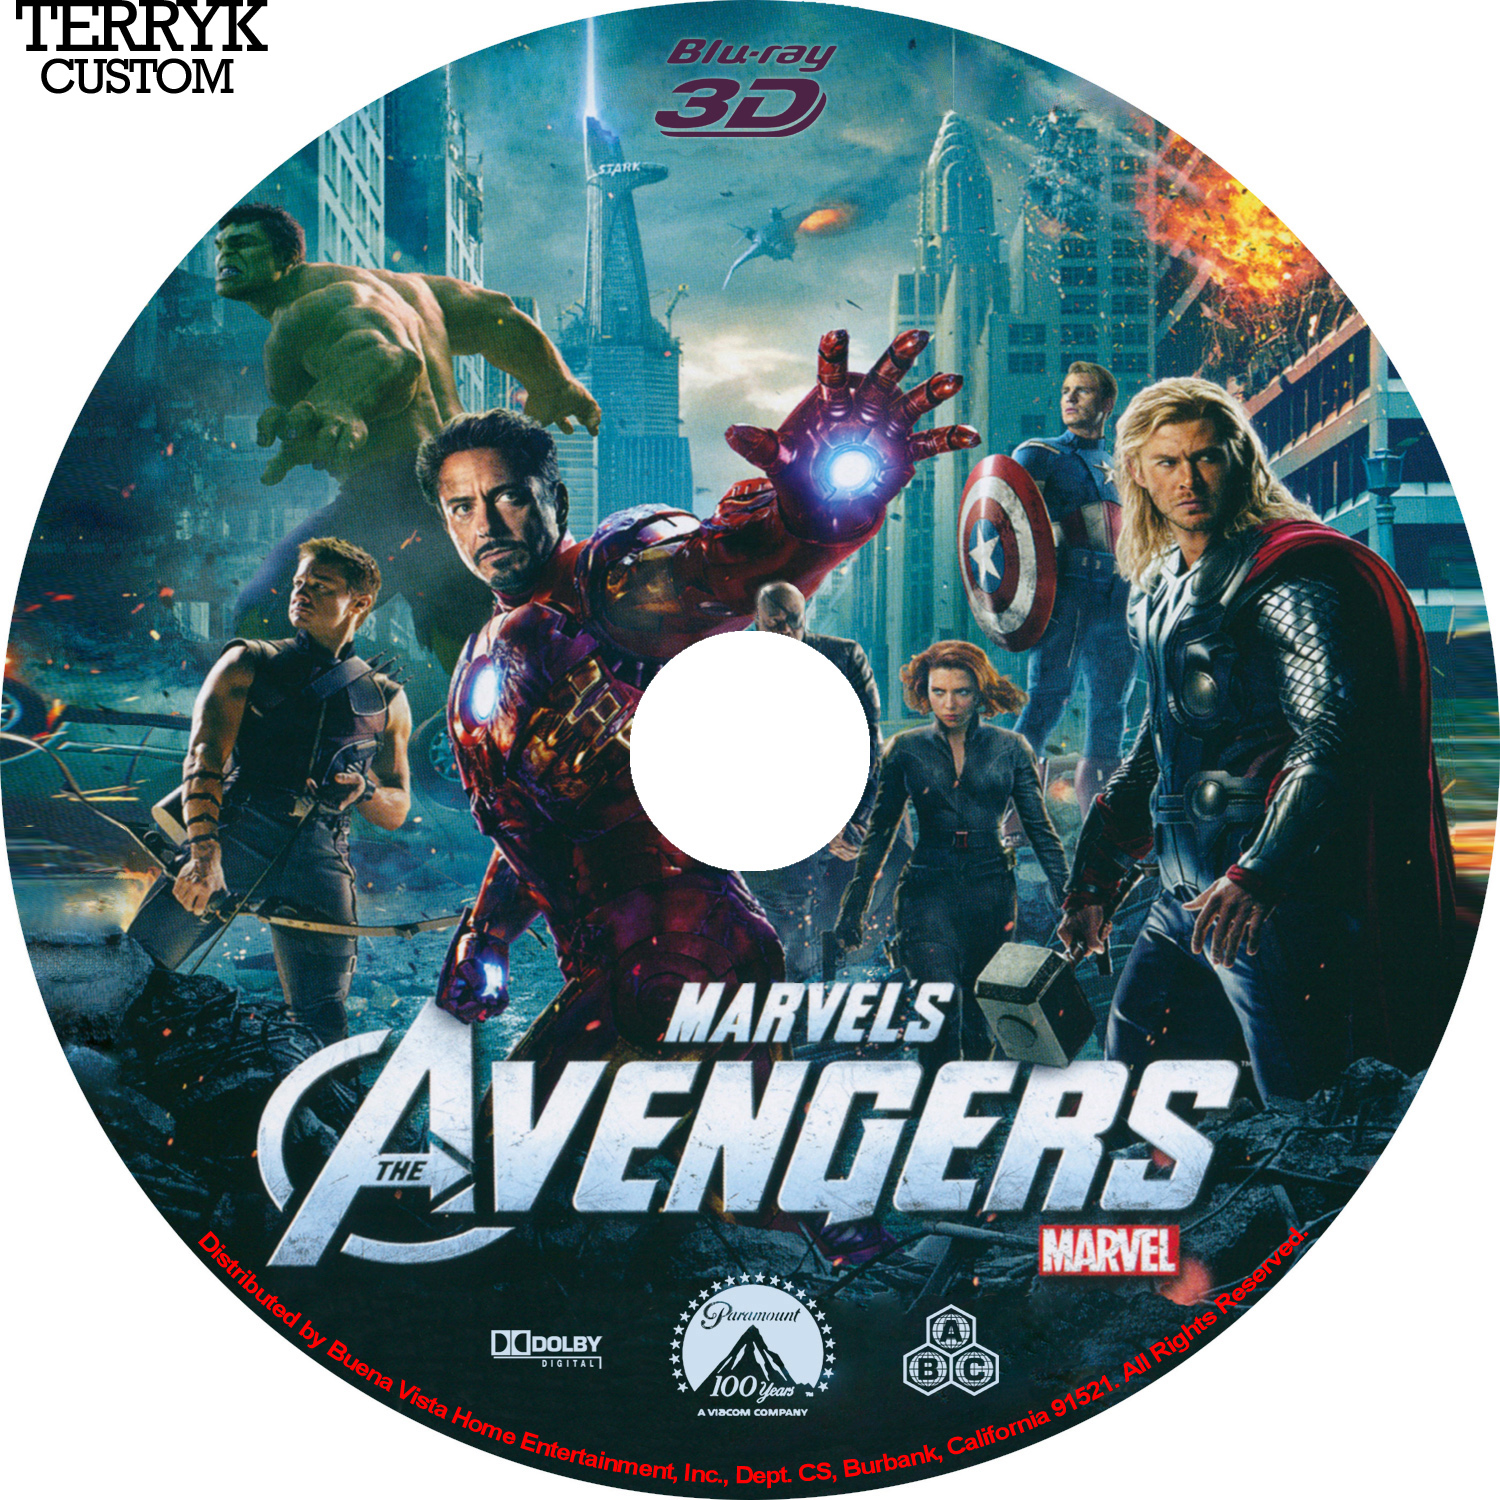 COVERS.BOX.SK ::: Avengers, The (Blu-ray 3D) - high quality DVD